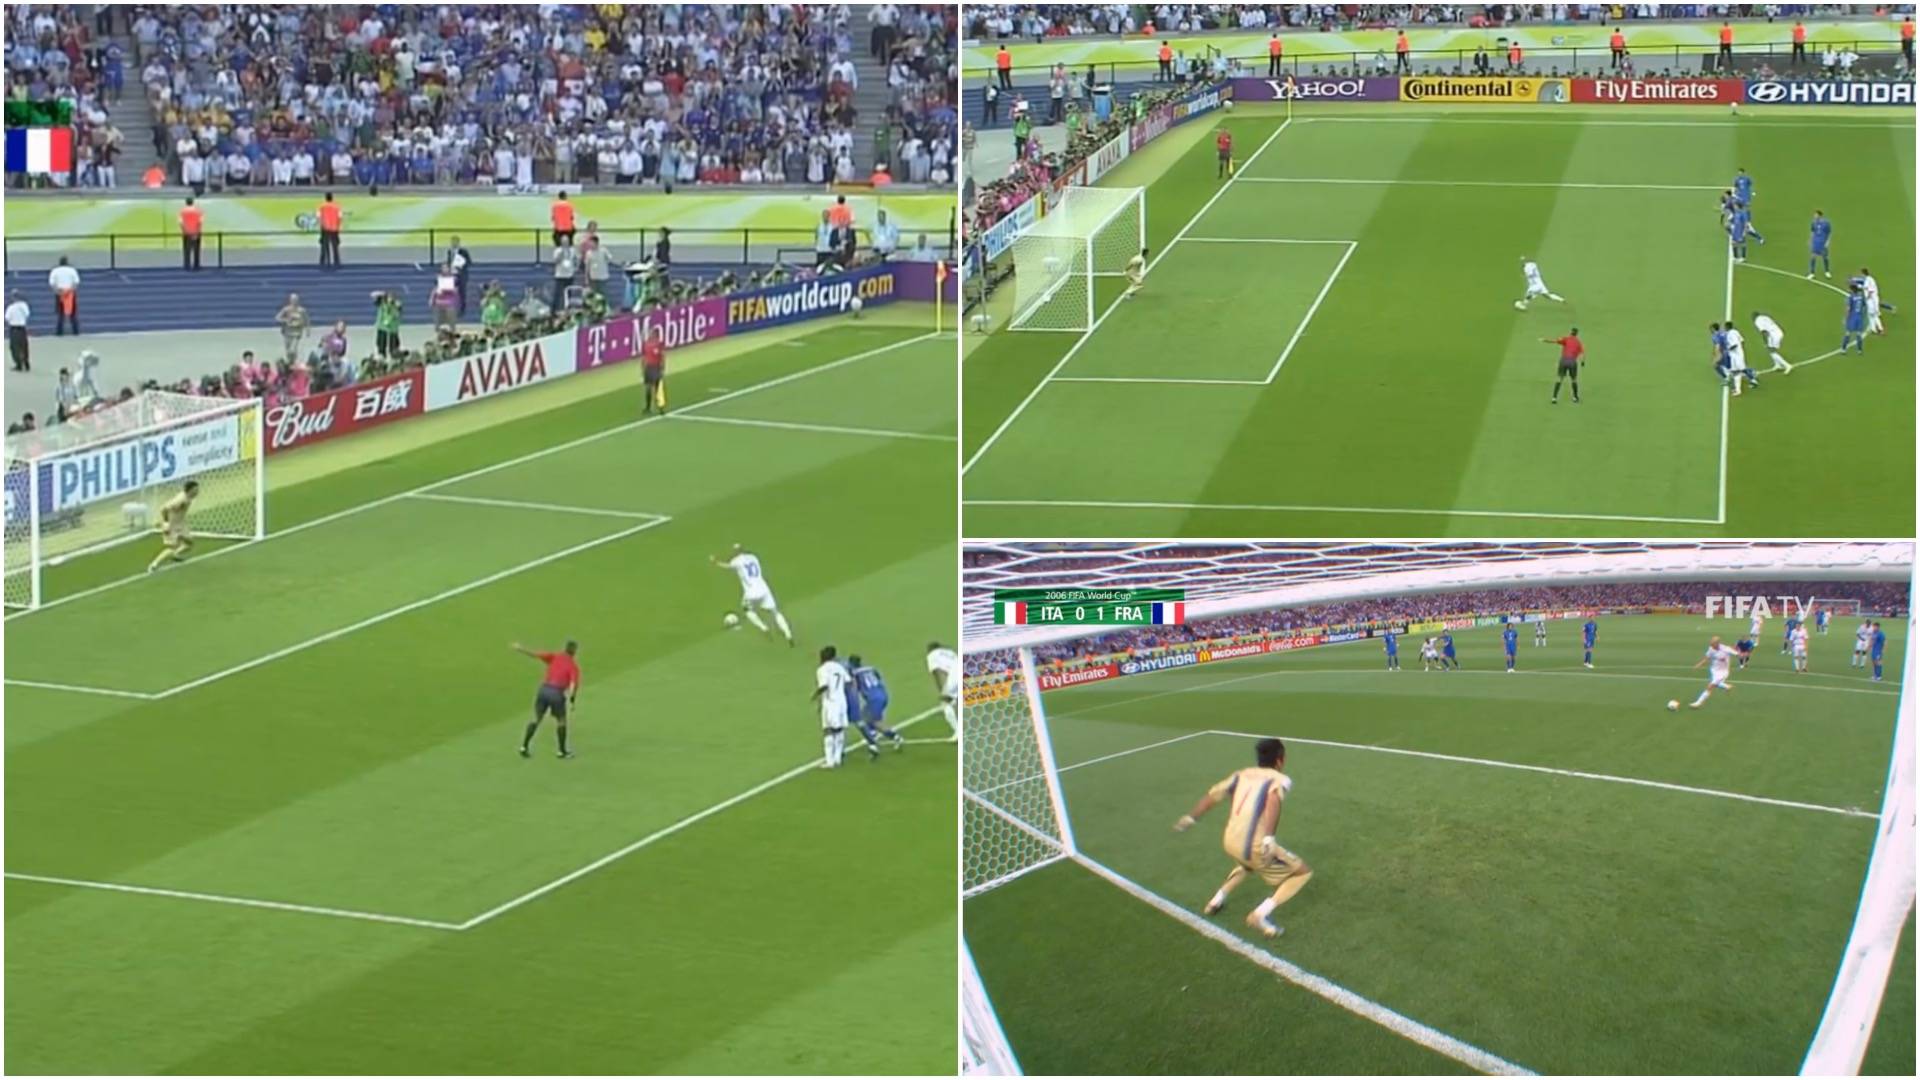 Zinedine Zidane’s contender for the greatest penalty in football history goes viral again